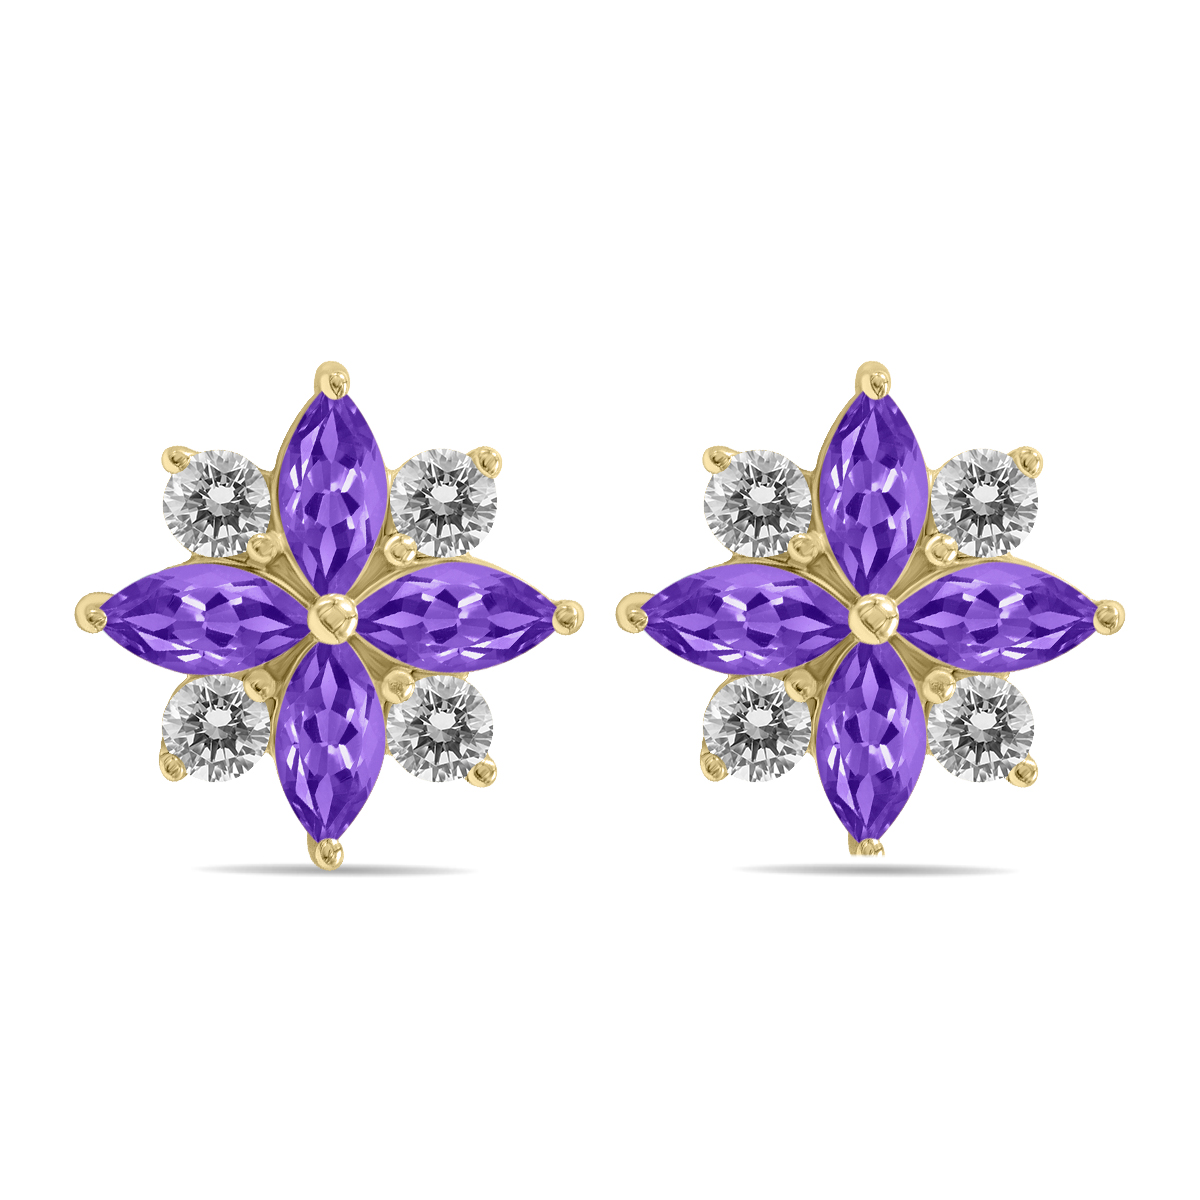 Image of 1 Carat TW Amethyst and Diamond Flower Earrings in 10K Yellow Gold